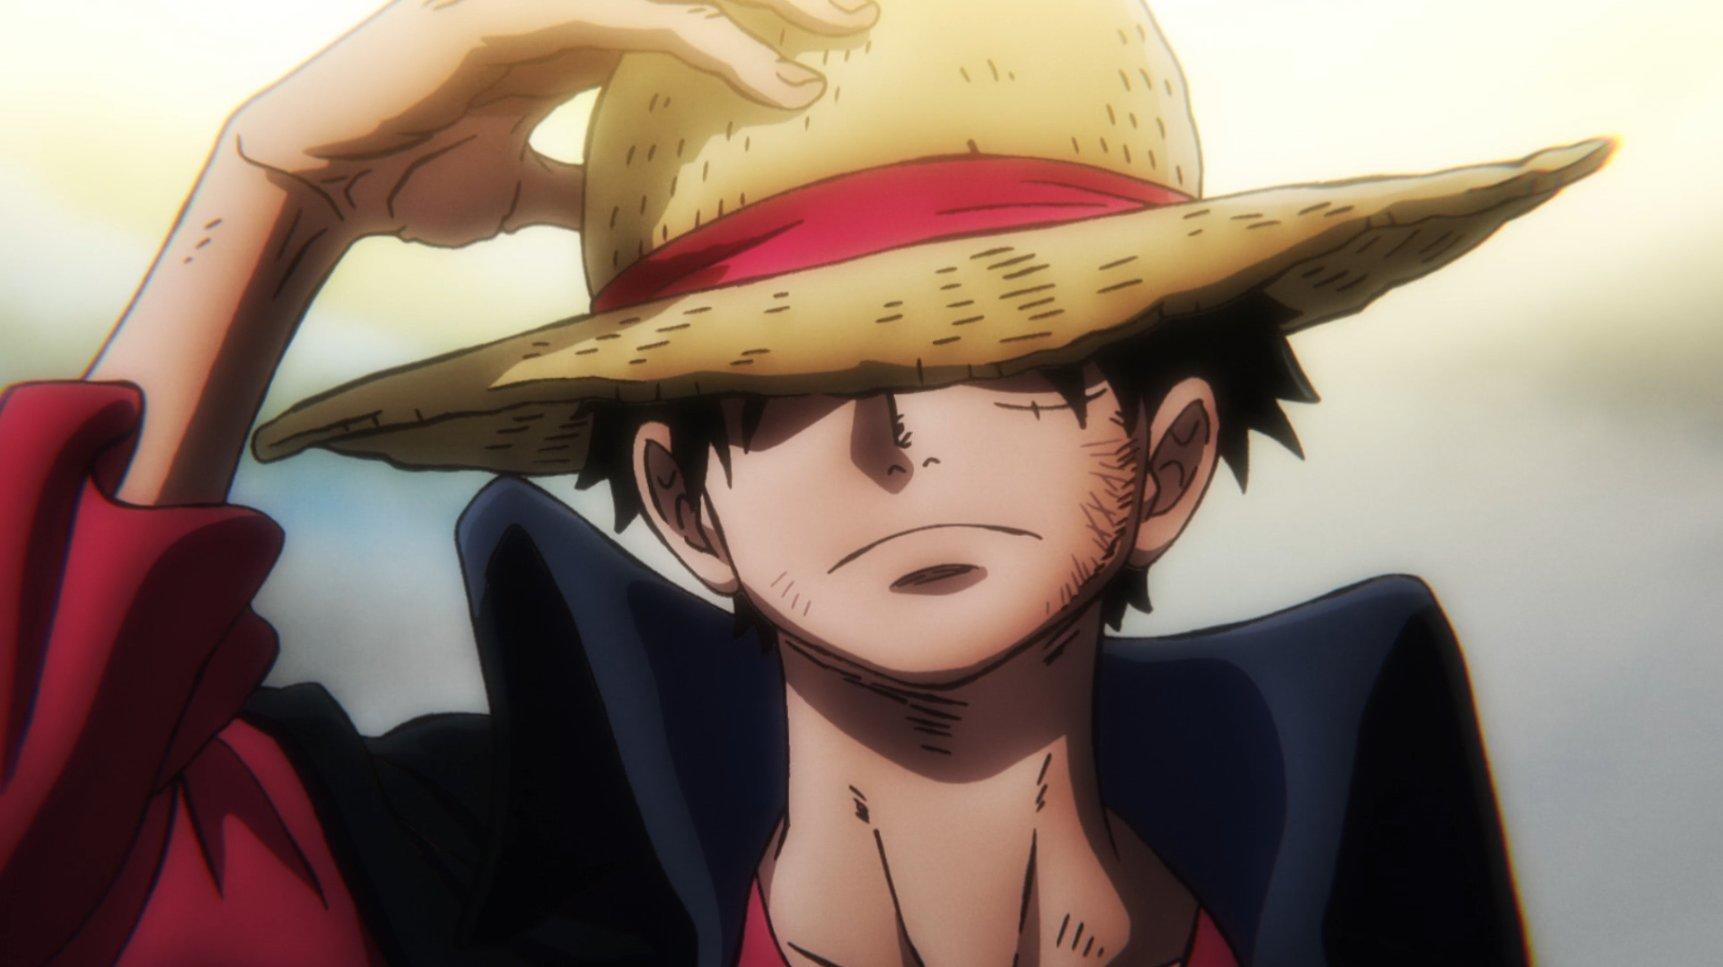 4596004 One Piece, anime boys, Monkey D. Luffy - Rare Gallery HD Wallpapers